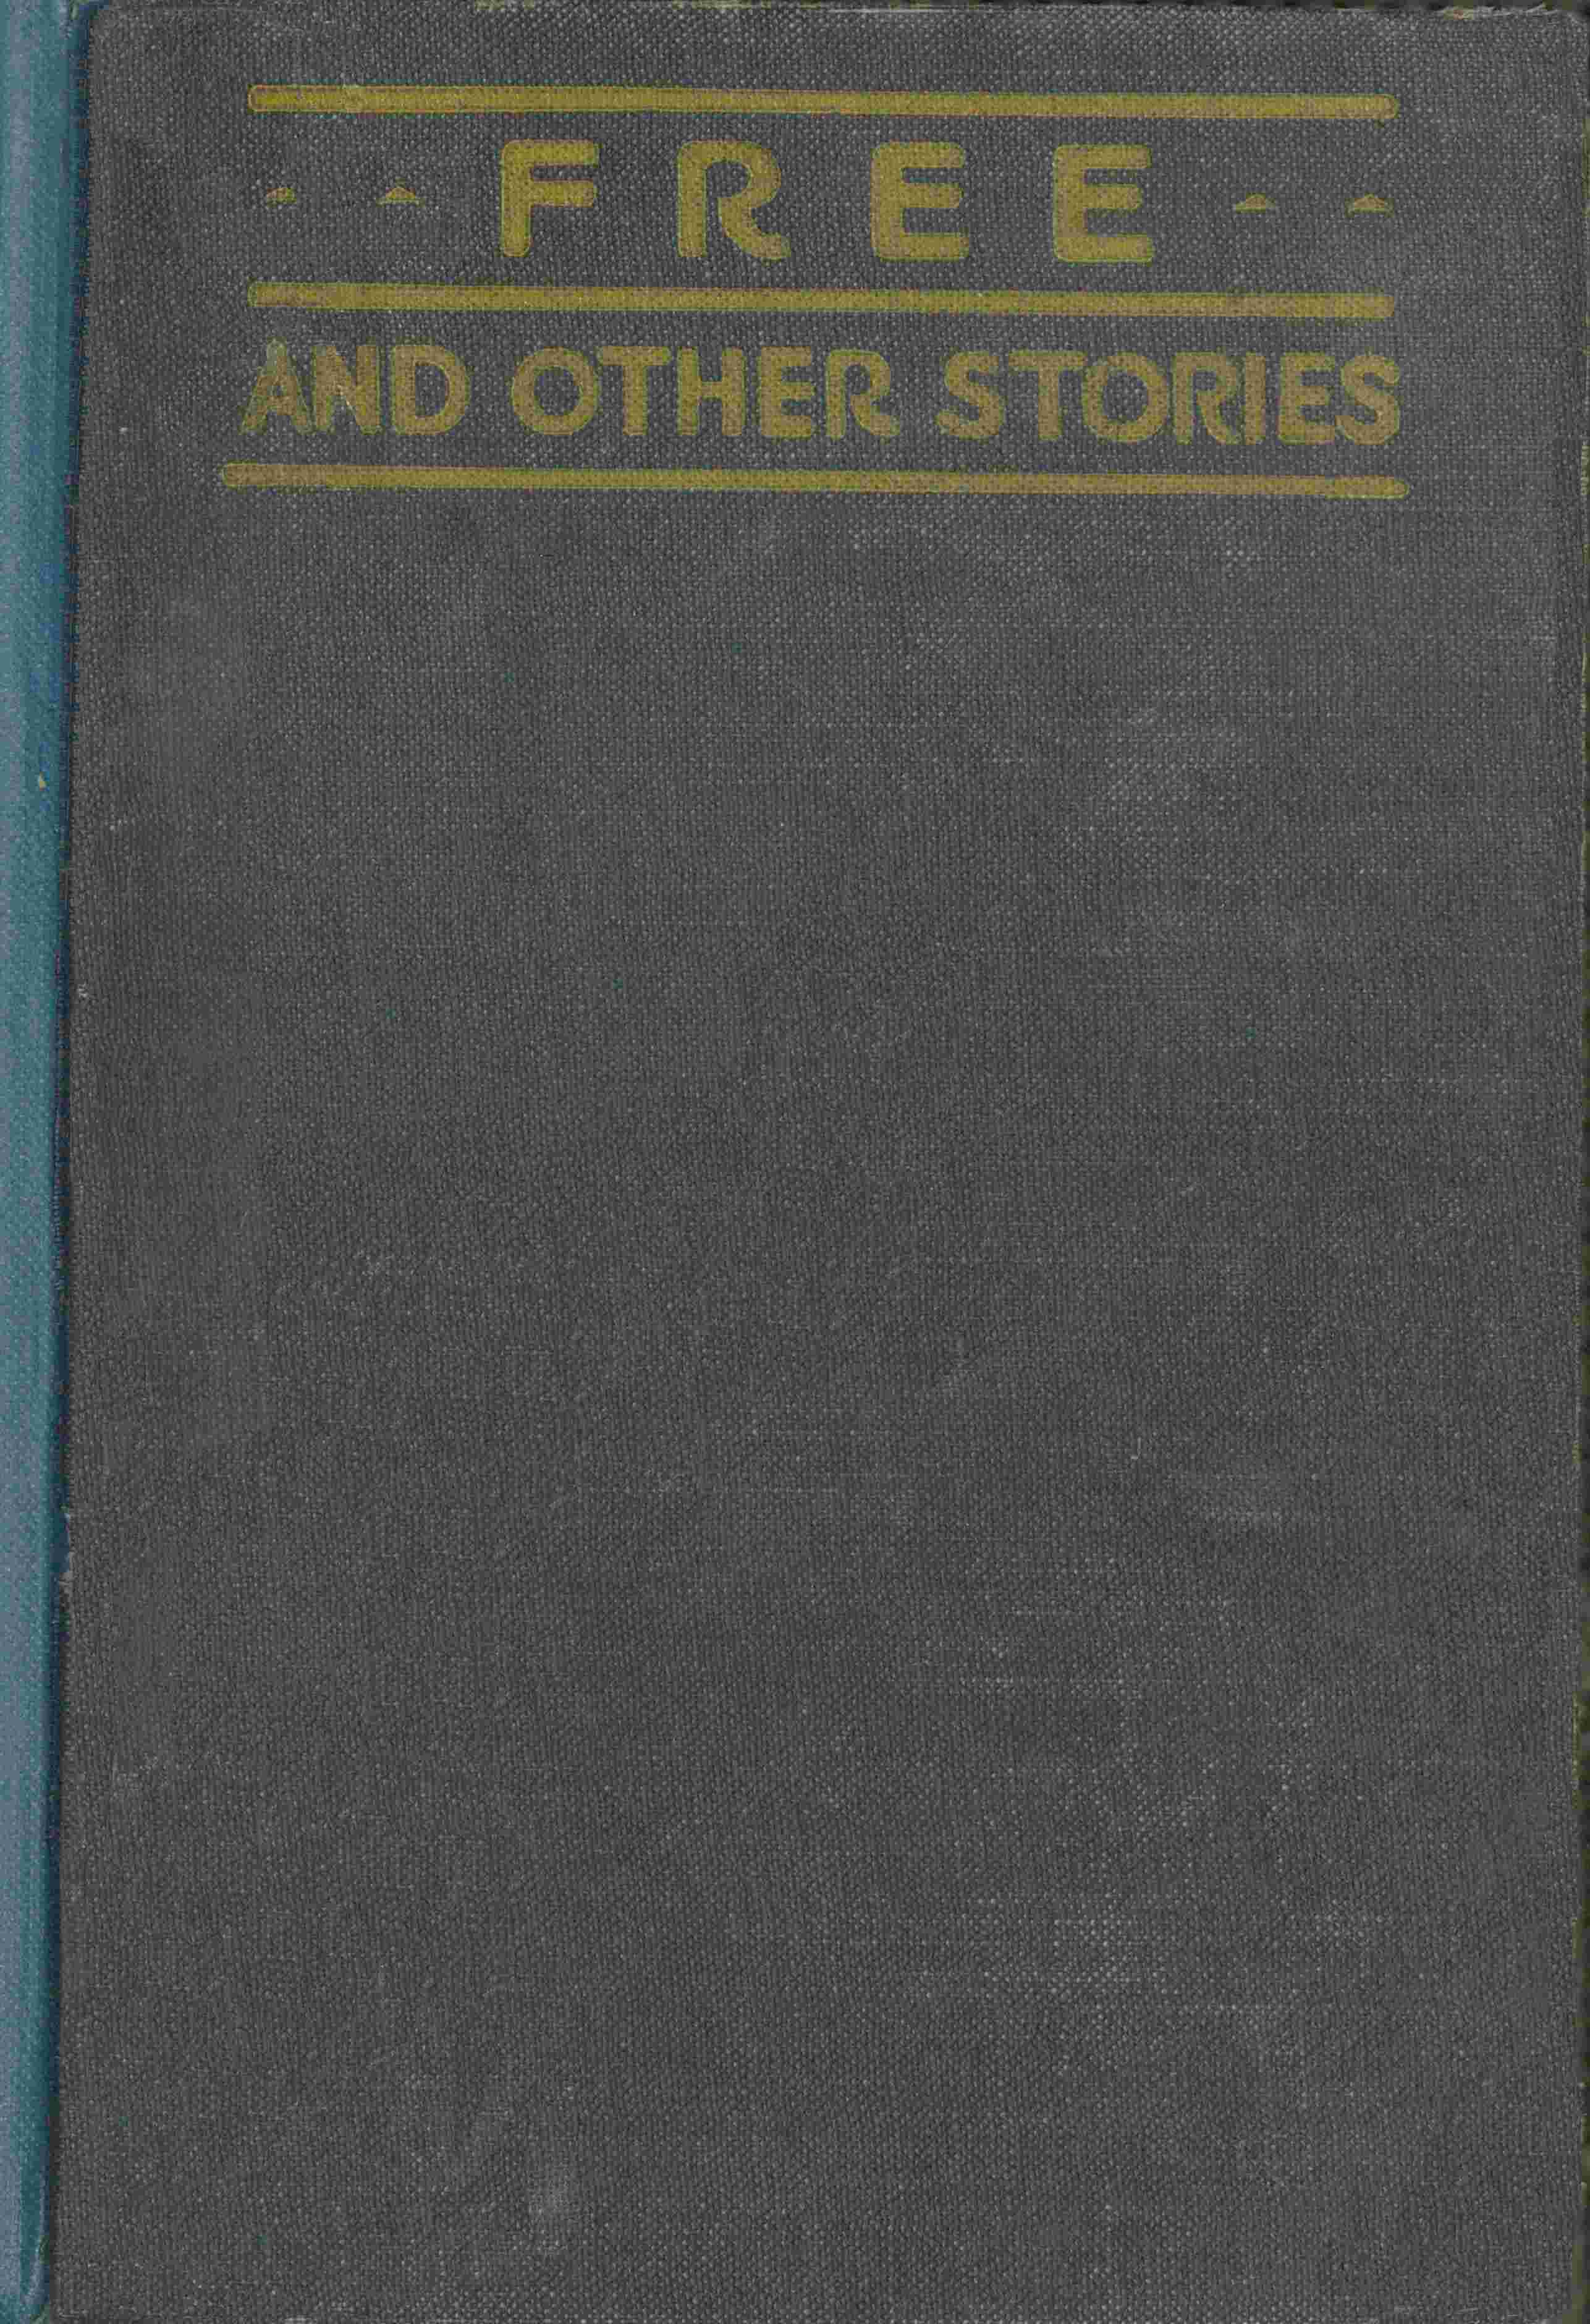 Free and Other Stories, by Theodore Dreiser—A Project Gutenberg eBook pic